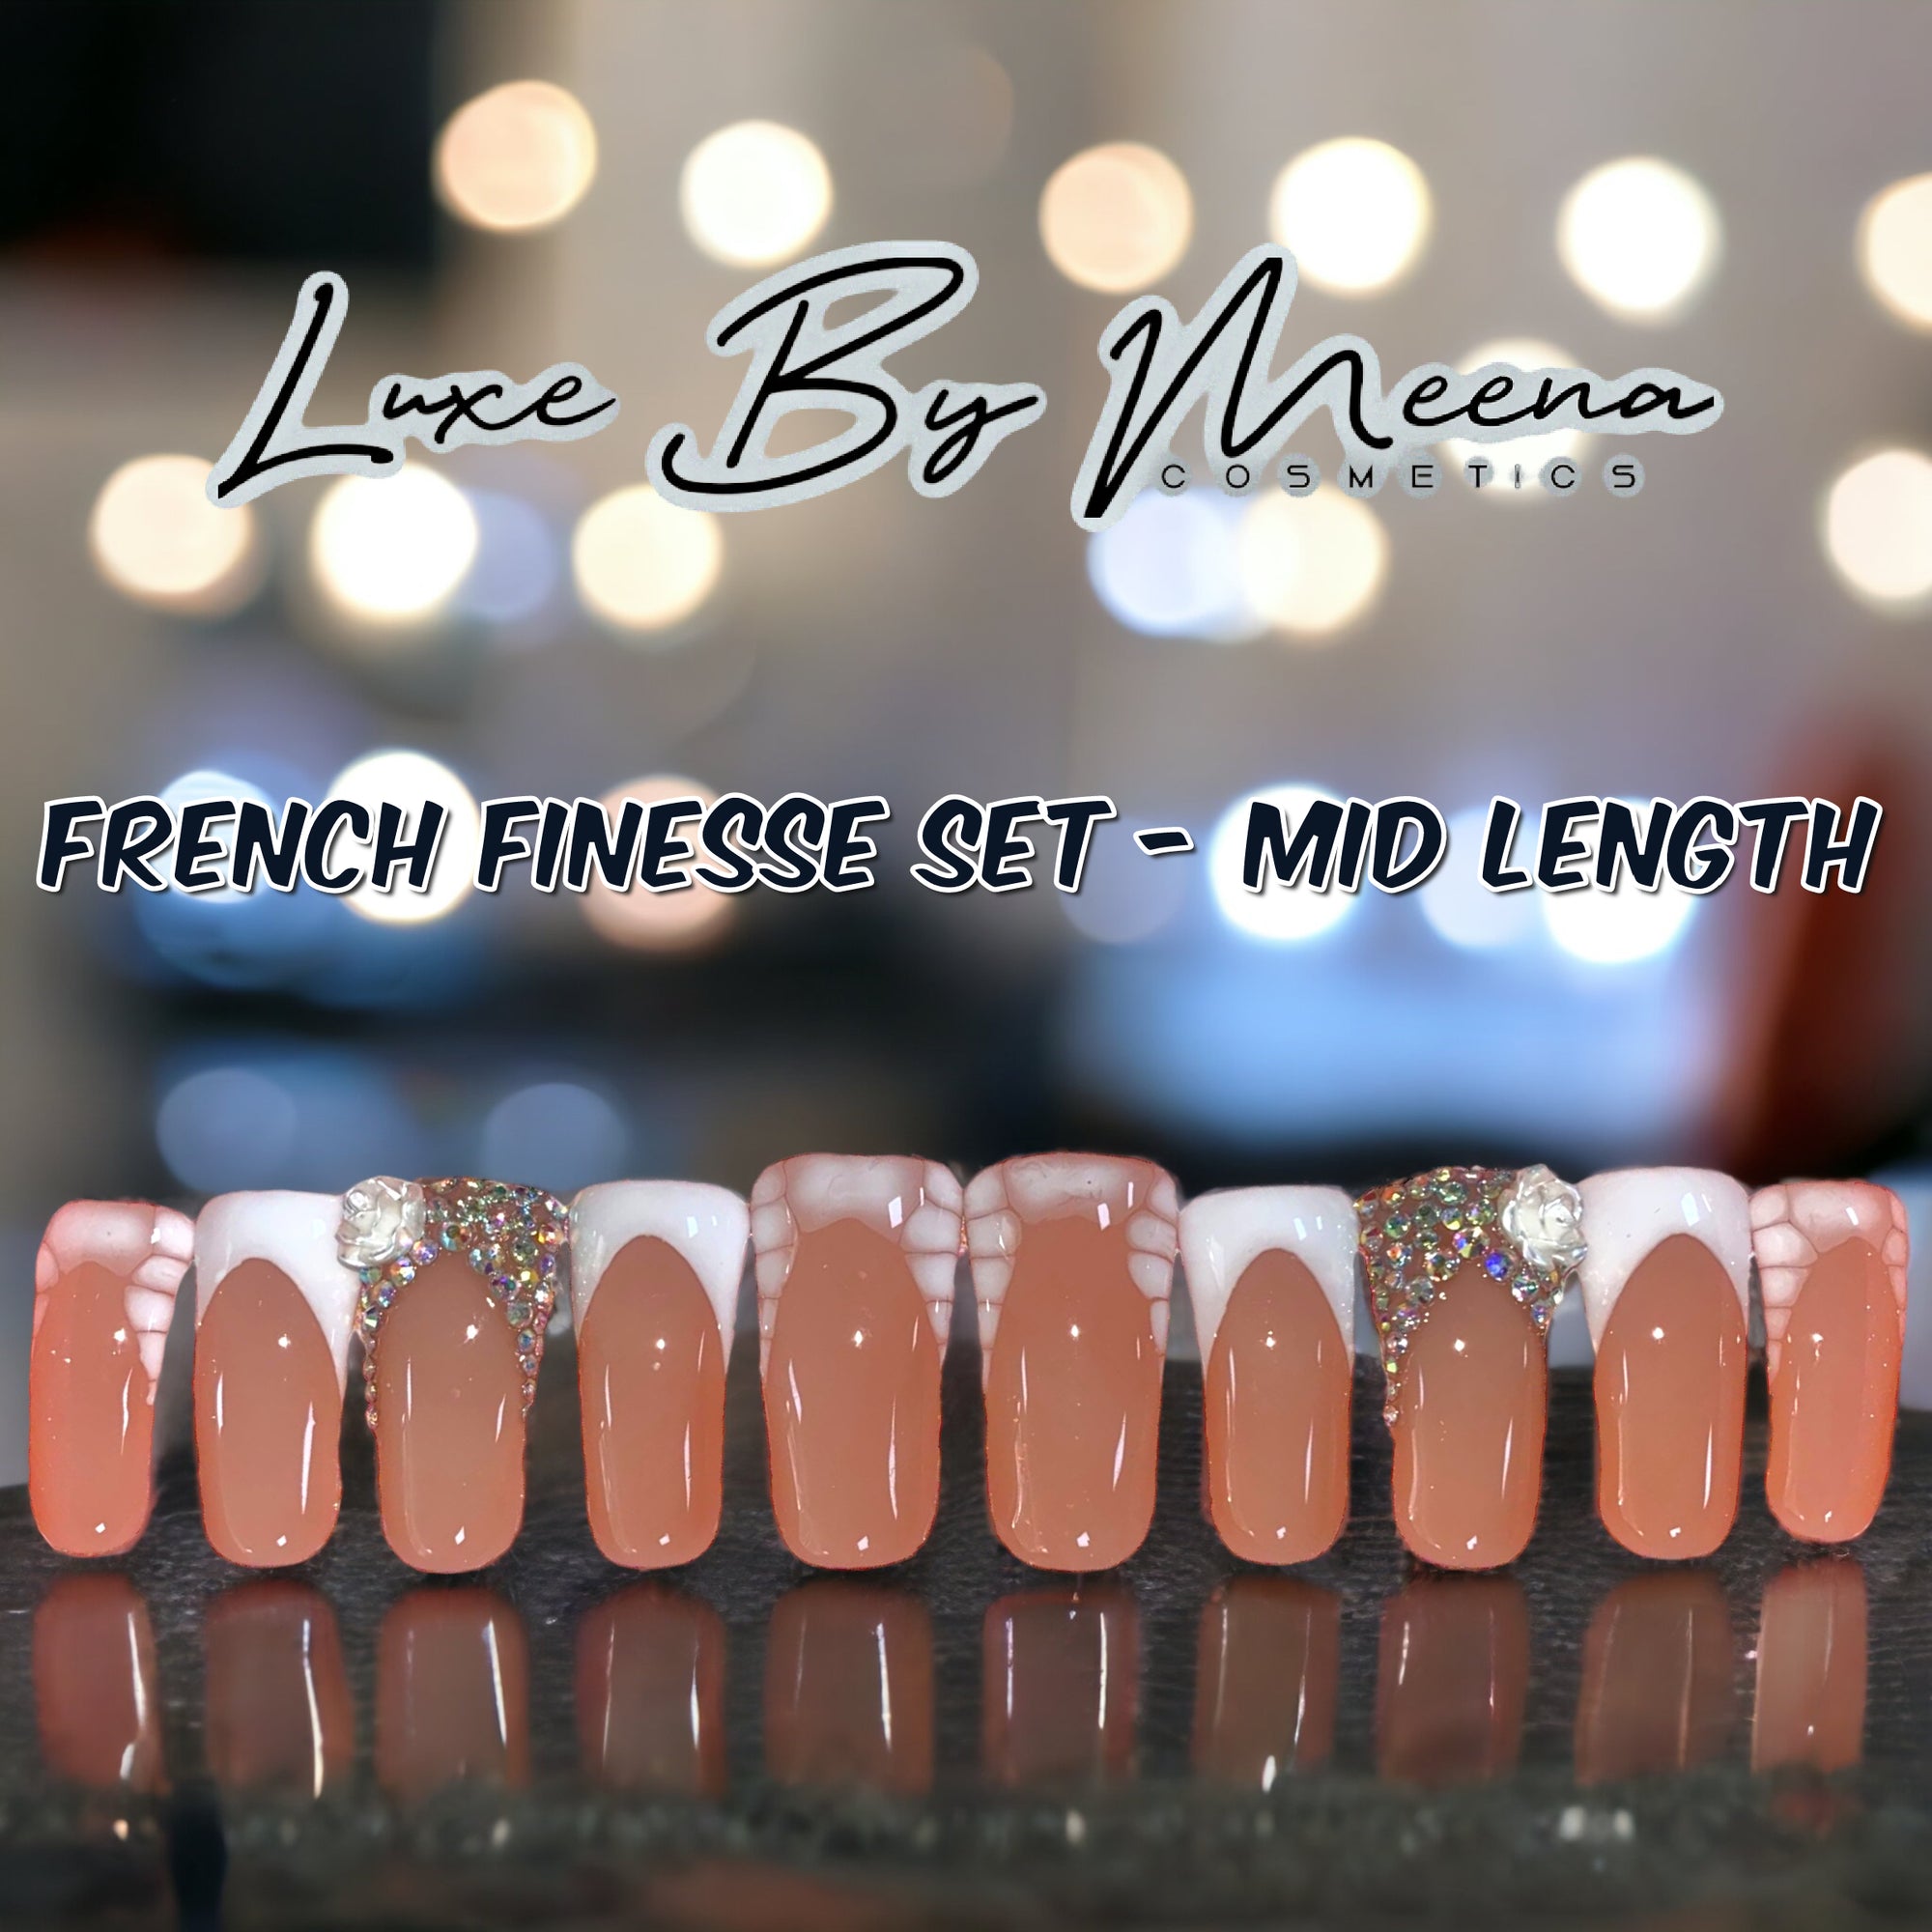 French Finesse - Handmade Press-On Nail Set